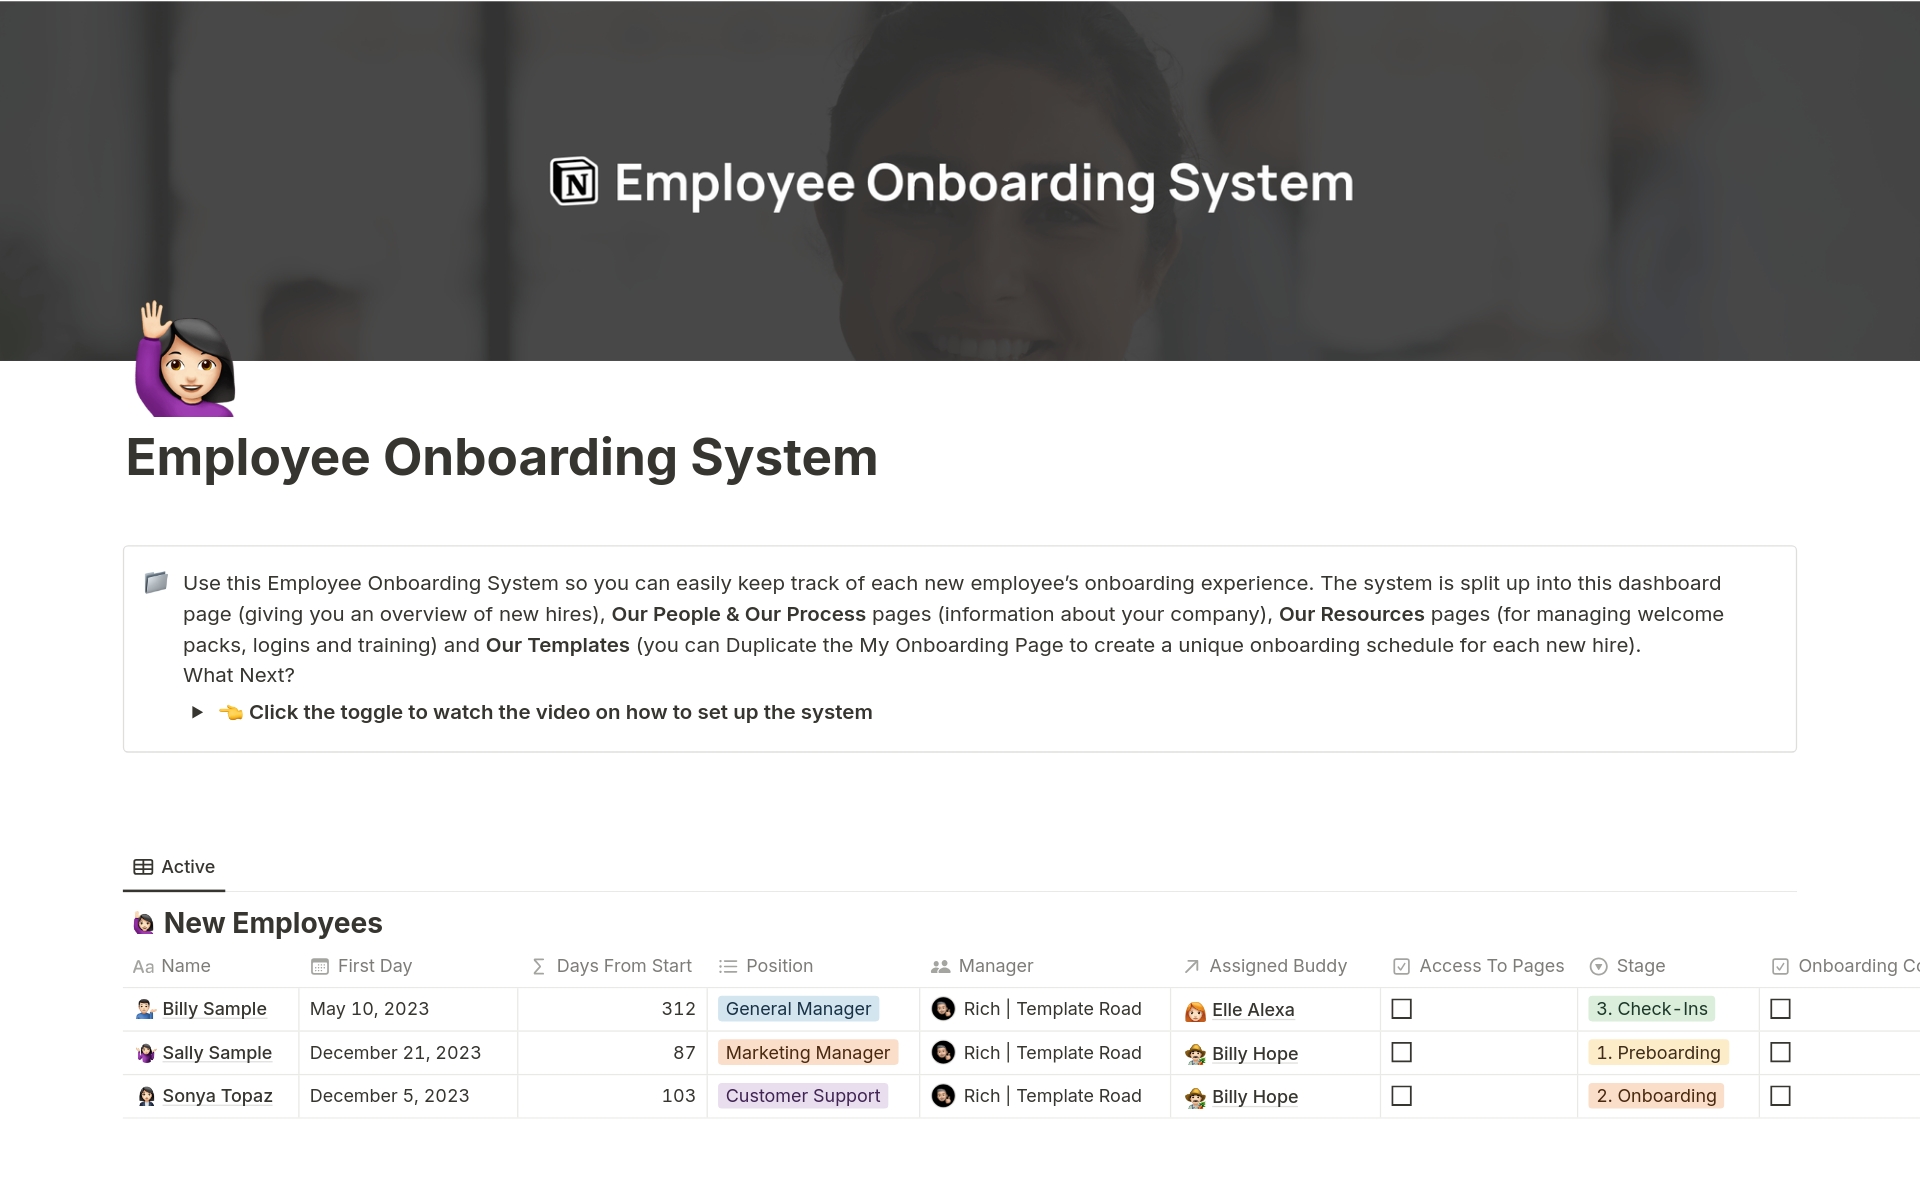 Use this comprehensive set of templates to ensure you craft the best employee onboarding experience possible.